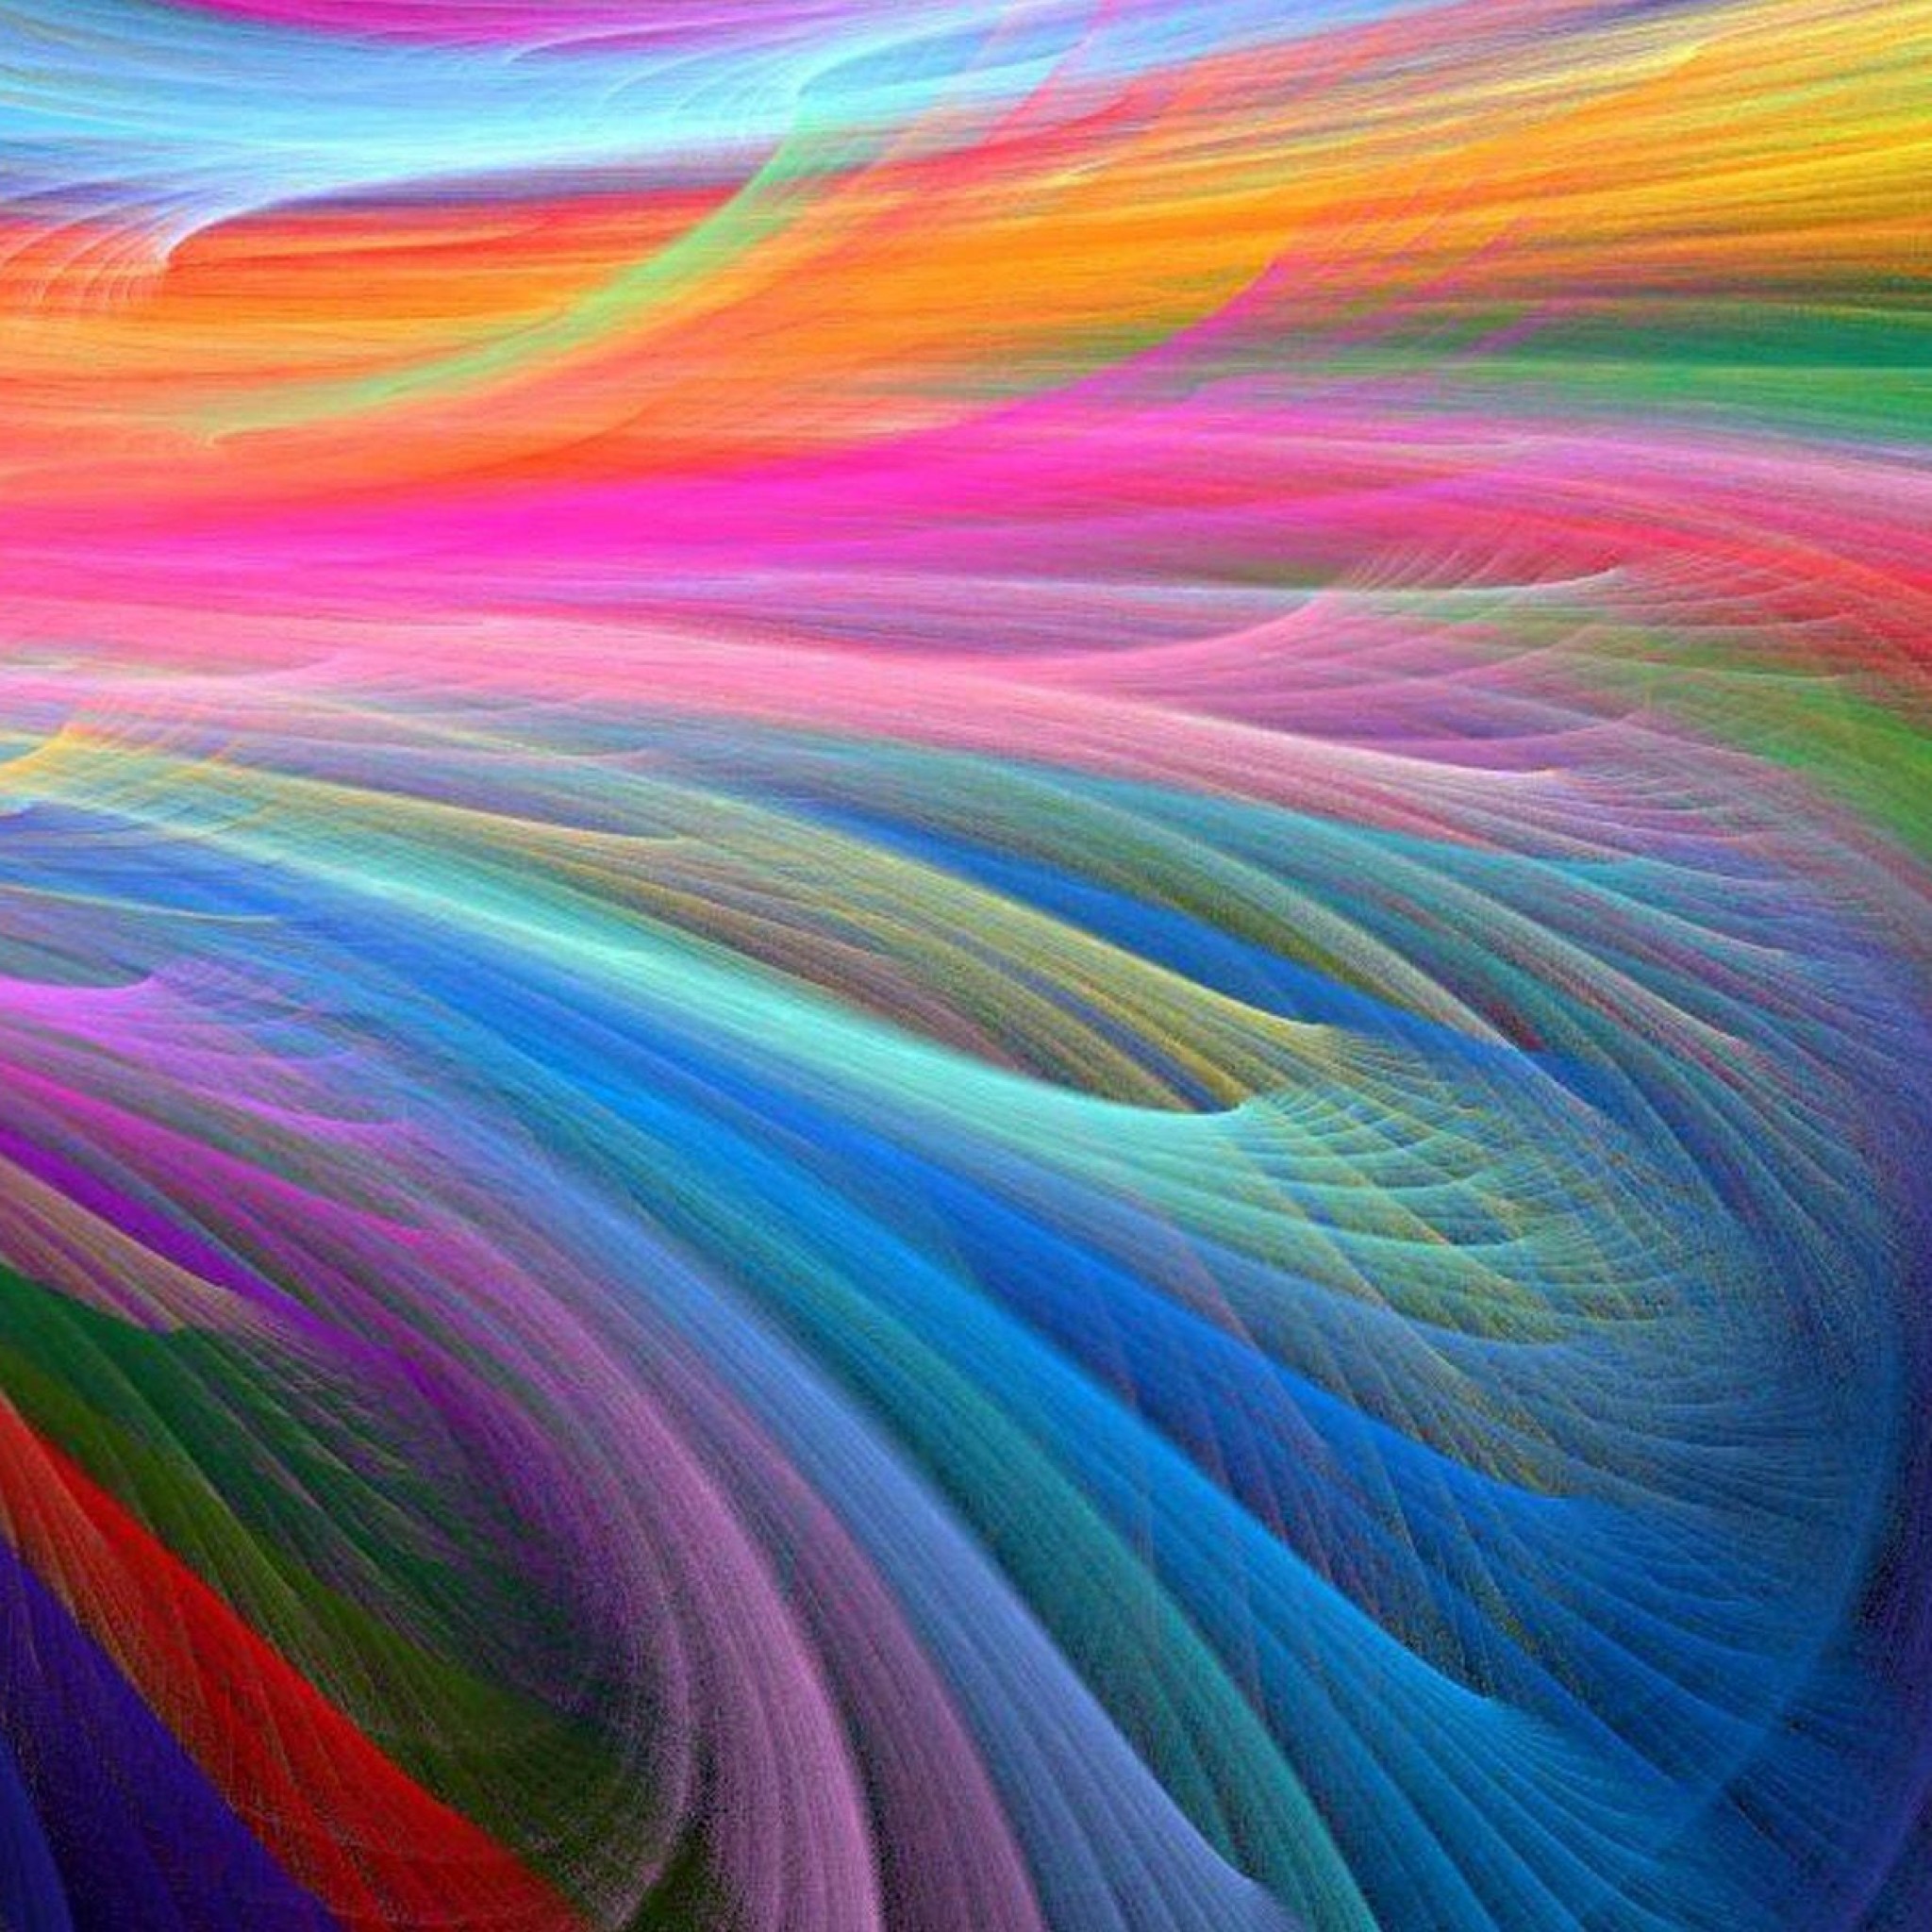 Colorful Wallpaper For Iphone 4 1 Hd Wallpaper Ipad タブレット壁紙ギャラリー